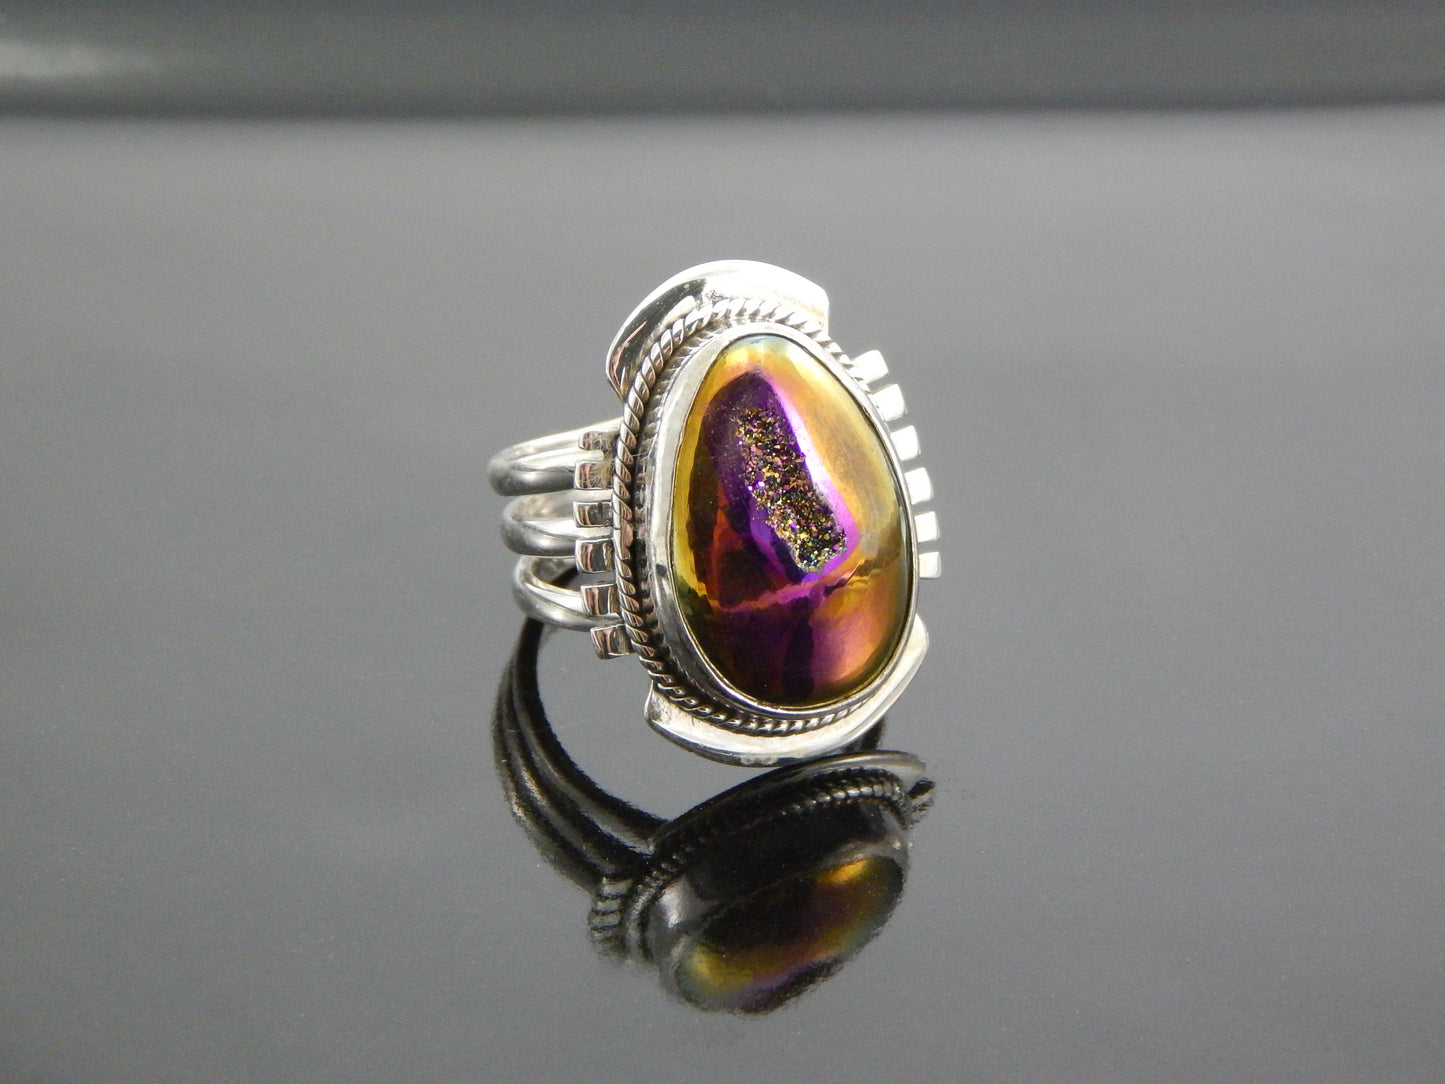 Pink and Gold Druzy Gemstone Ring in 925 Silver